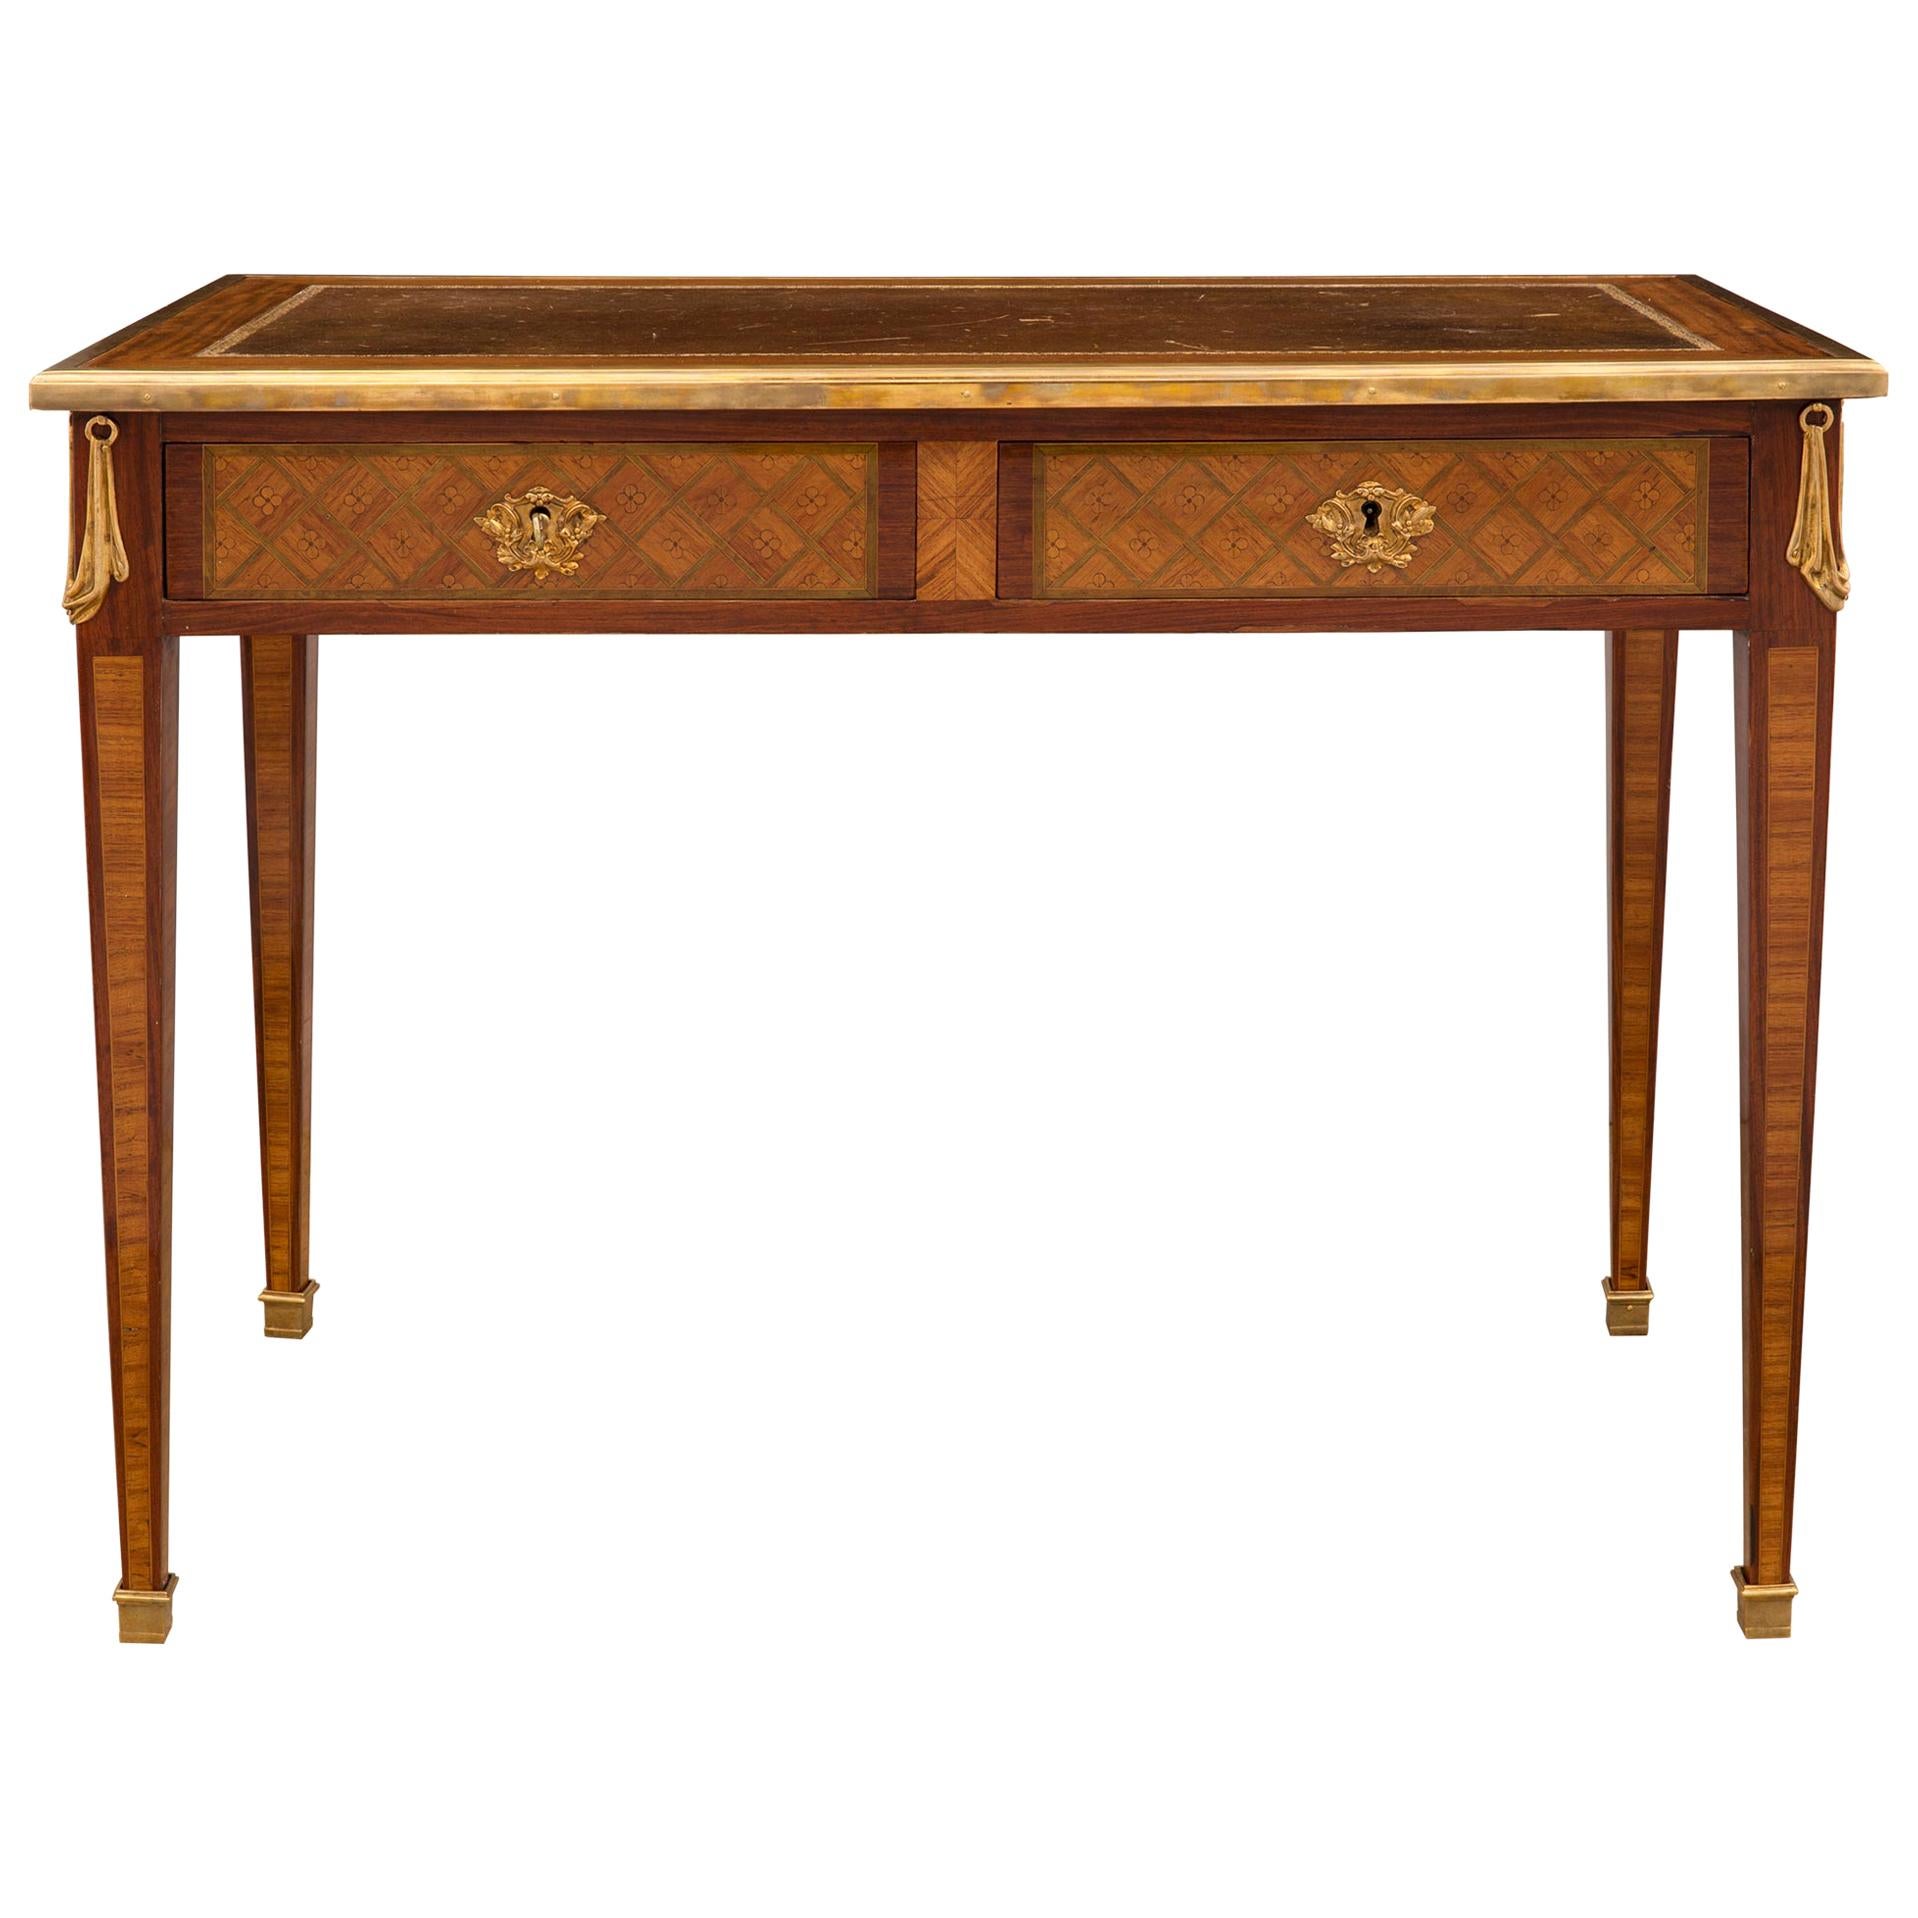 French Mid-19th Century Louis XVI Style Tulipwood, Kingwood and Charmwood Desk For Sale